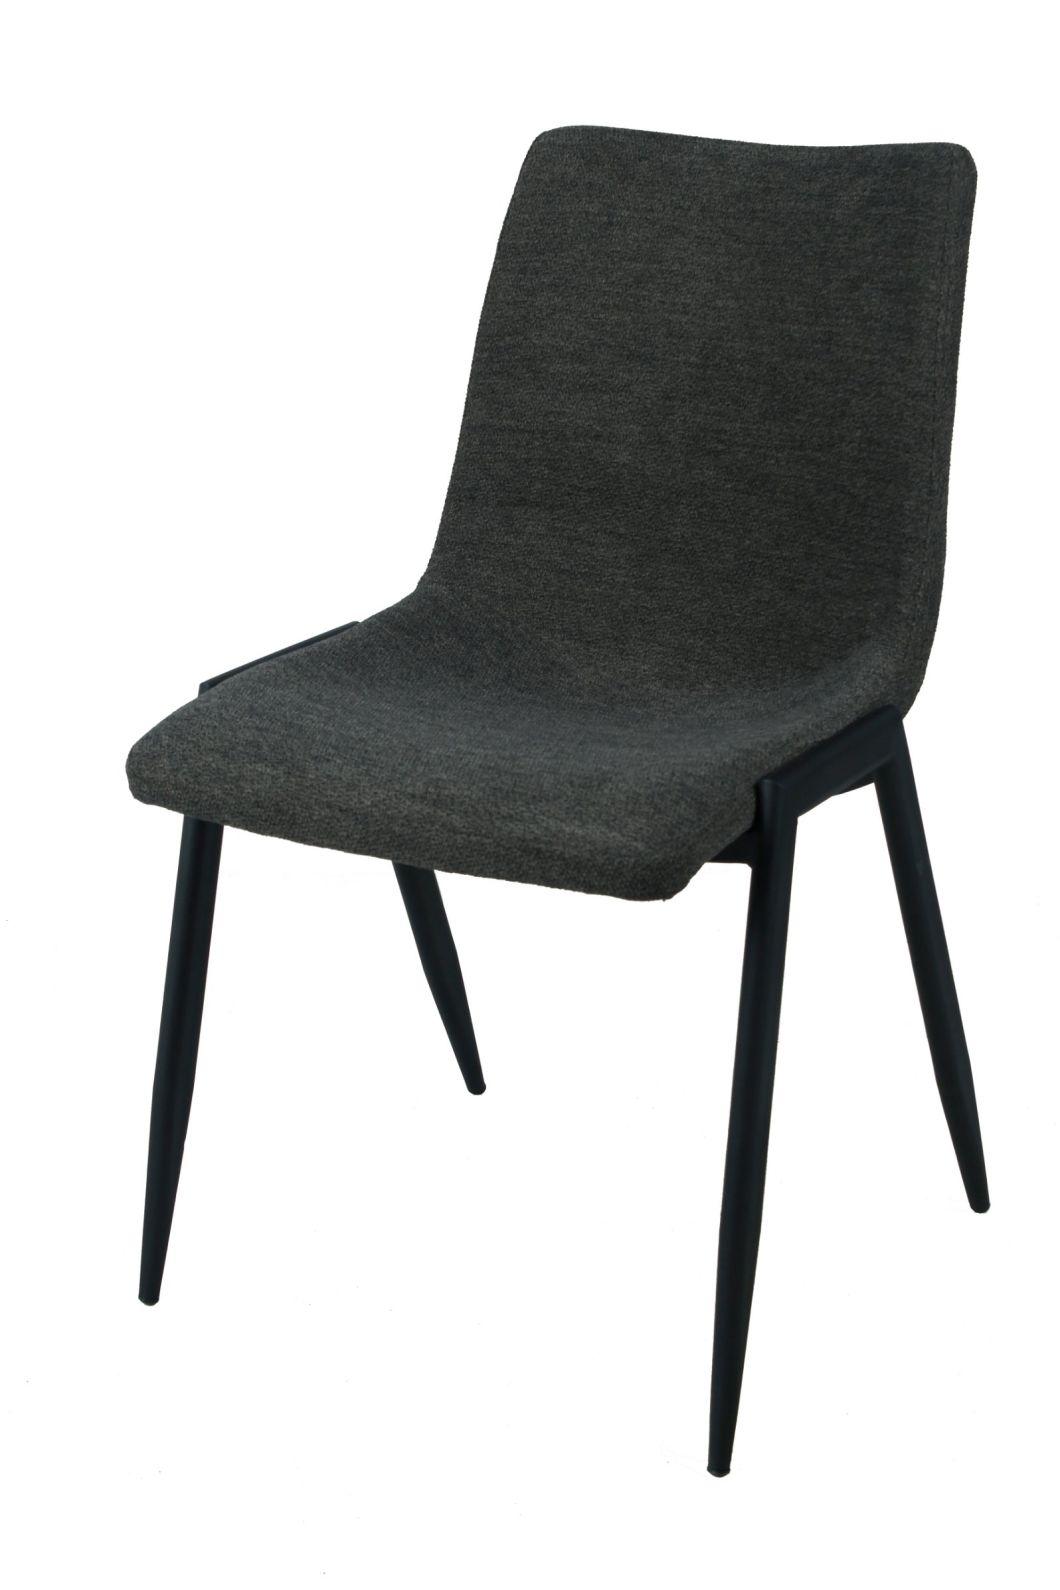 Modern Home Restaurant Office Furniture Fabric Dining Chair with Coated Steel Tube Leg Dining Chair